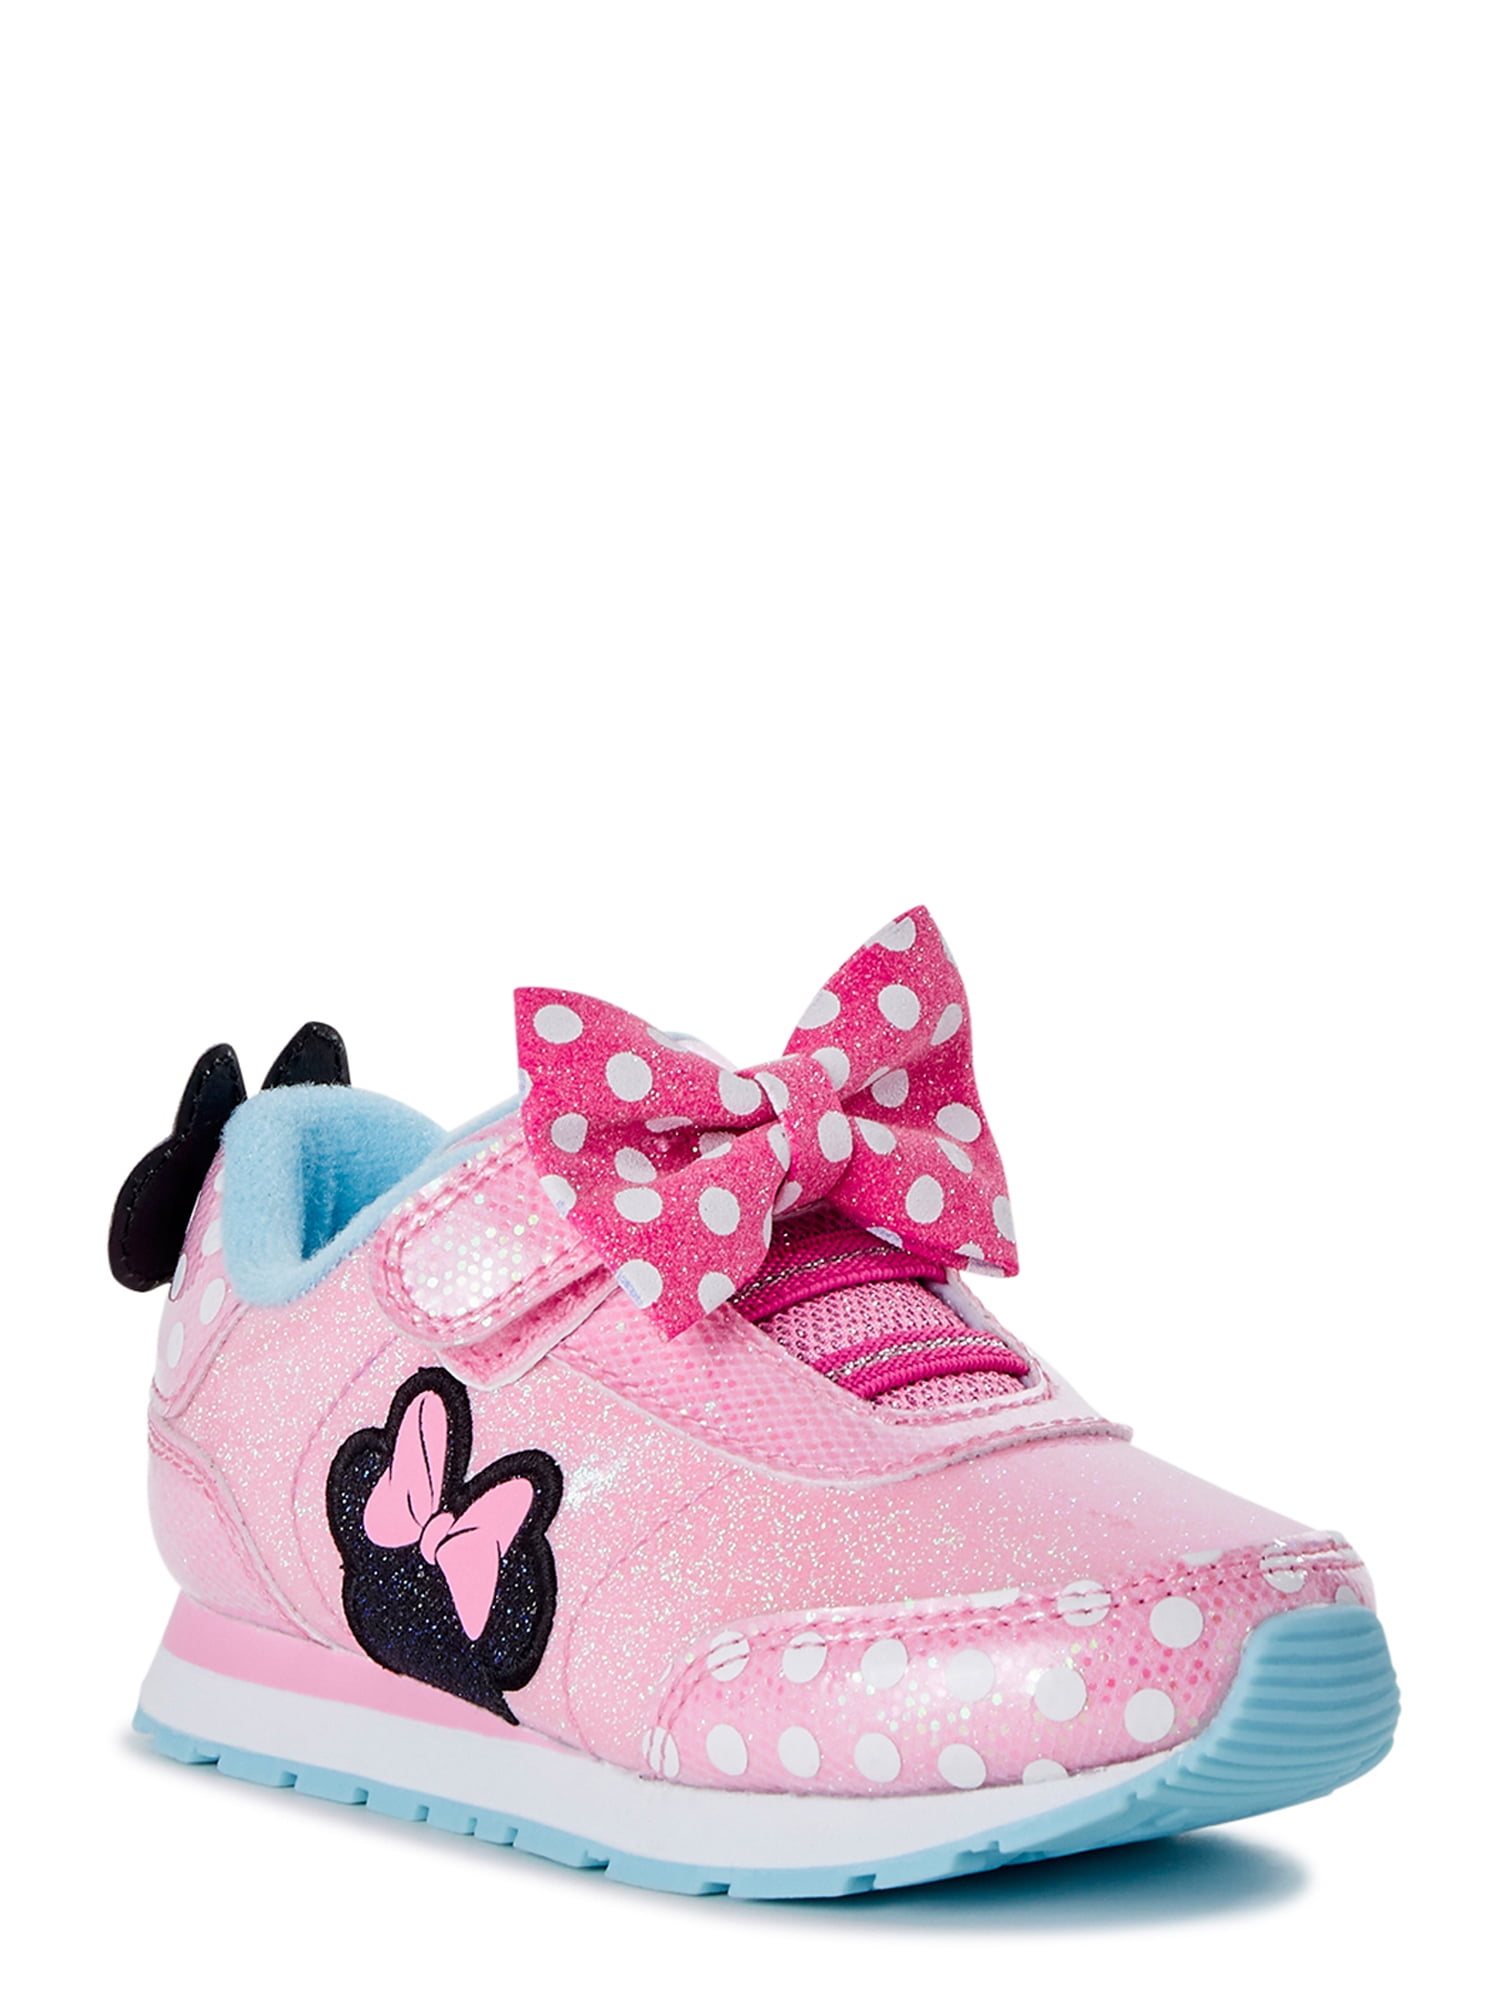 Minnie Mouse Toddler Girls Athletic Sneakers, Sizes 7-12